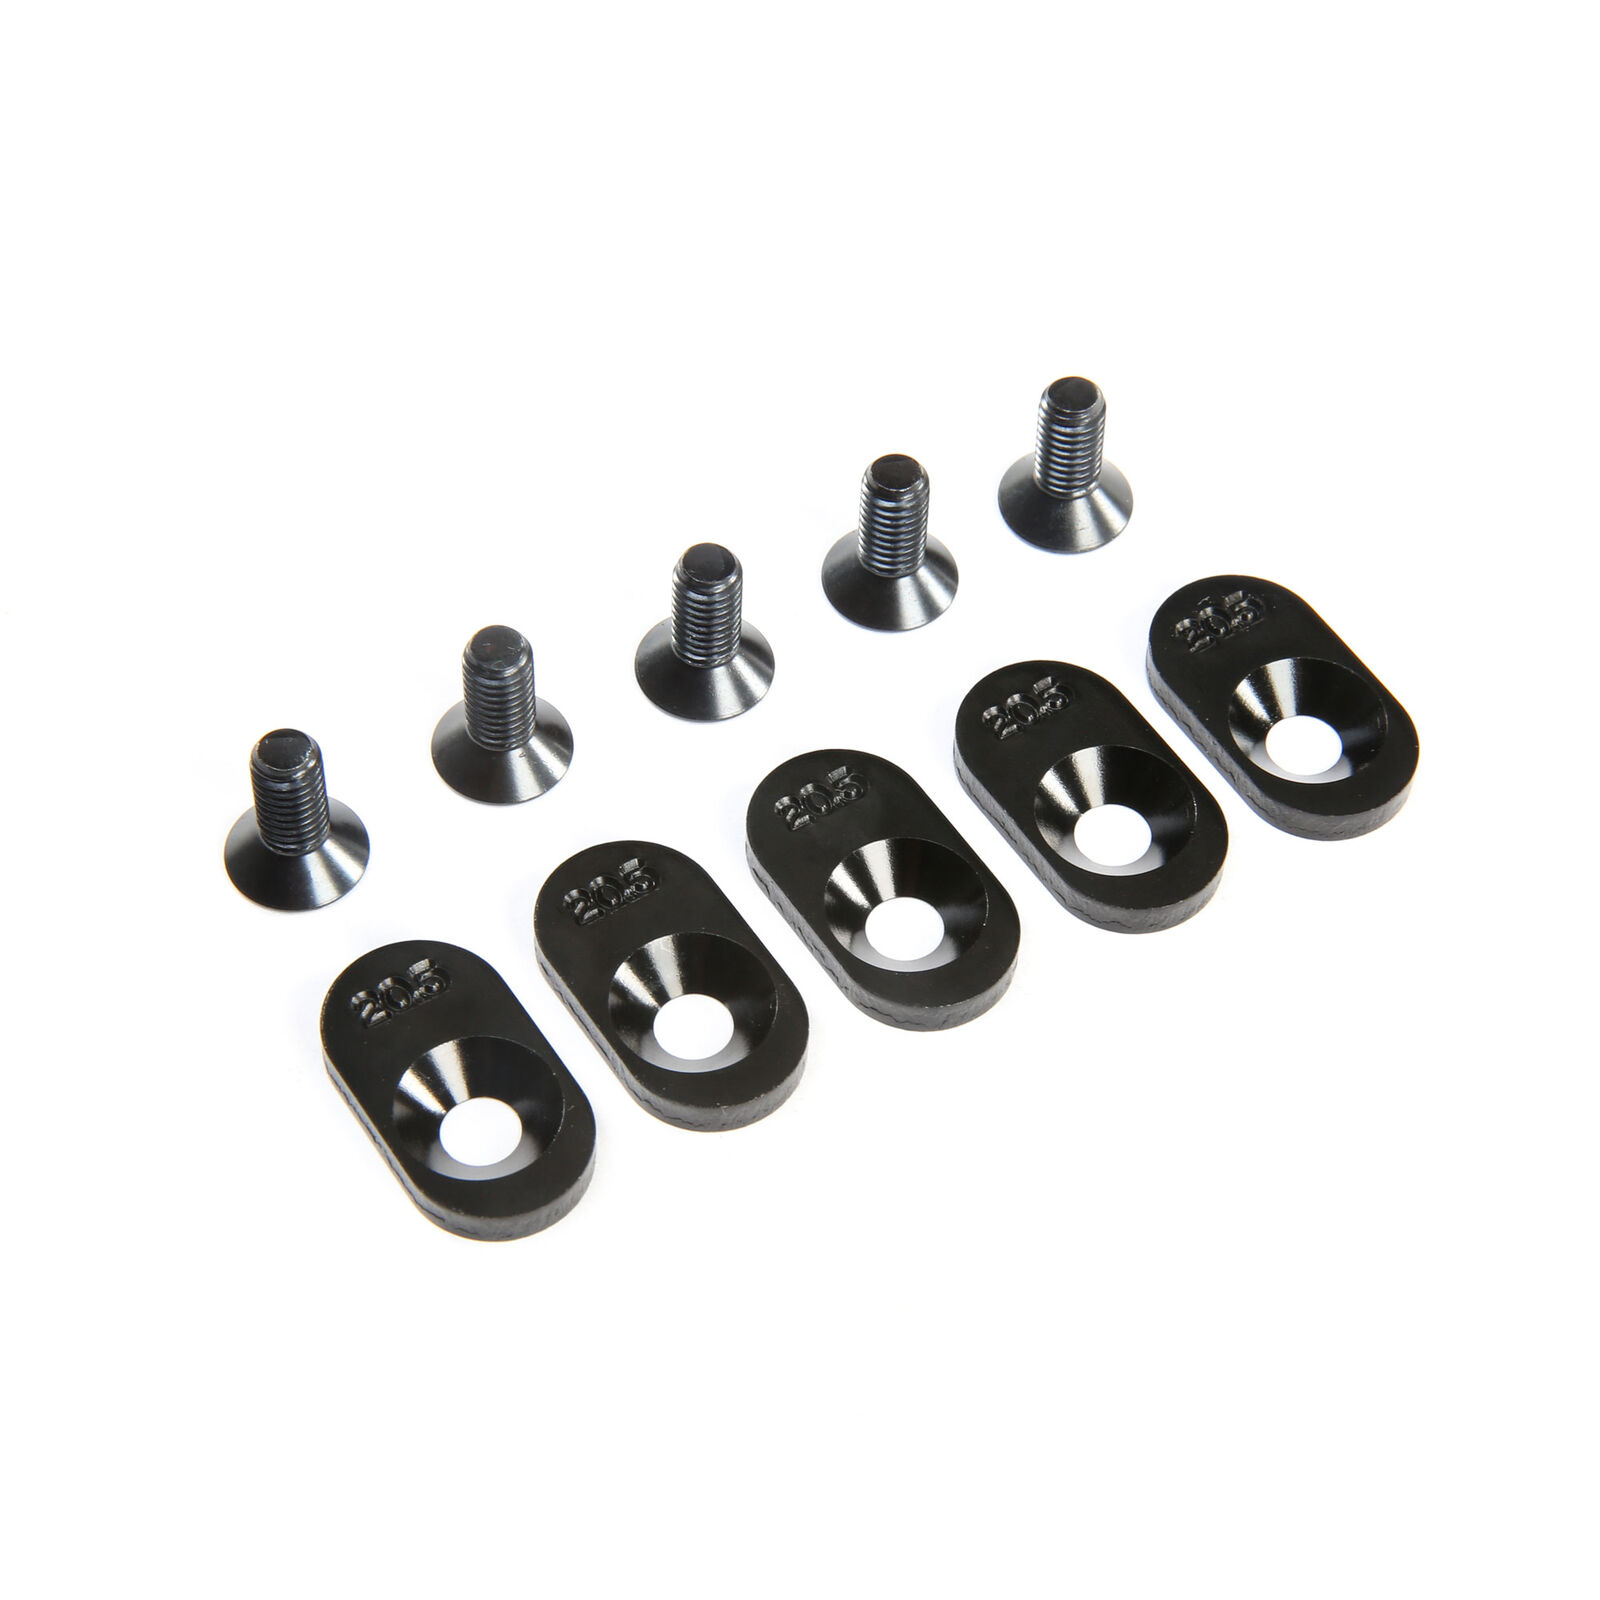 Engine Mount Insert and Screws 20.5T, Black (5): 5ive-T 2.0 (fits 62T spur)